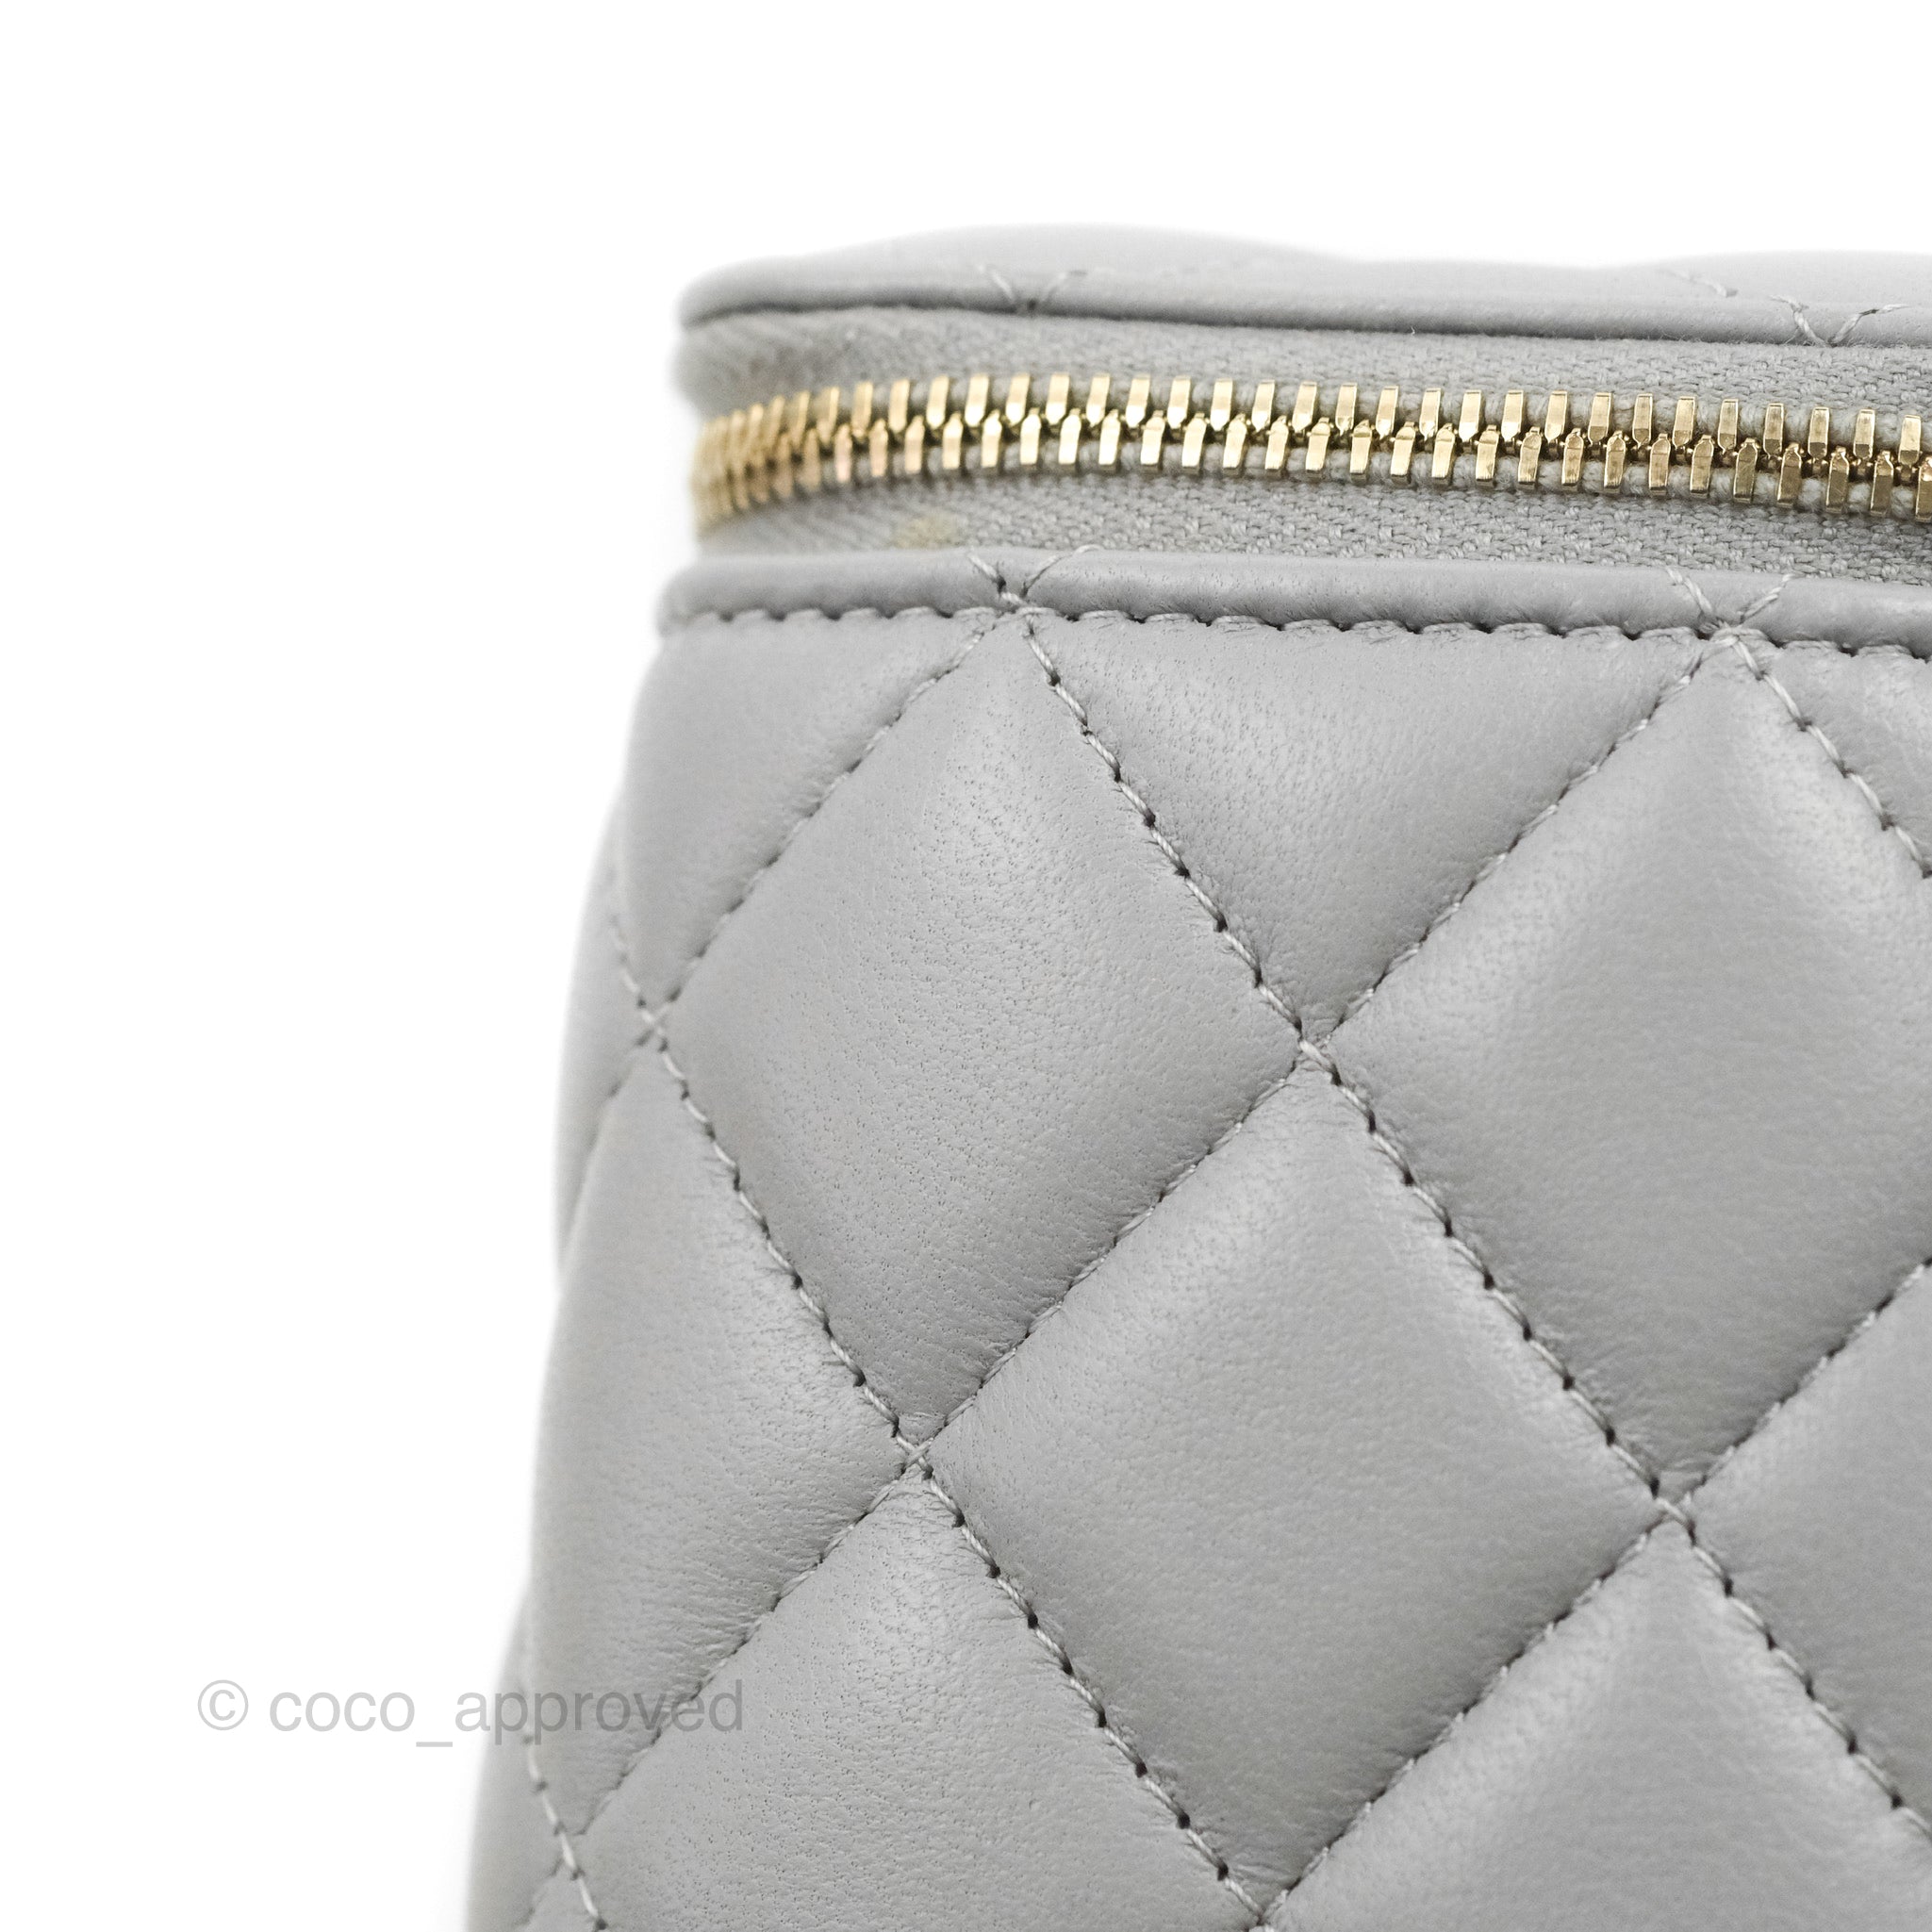 Chanel Pearl Crush Vanity With Chain Grey Lambskin Aged Gold